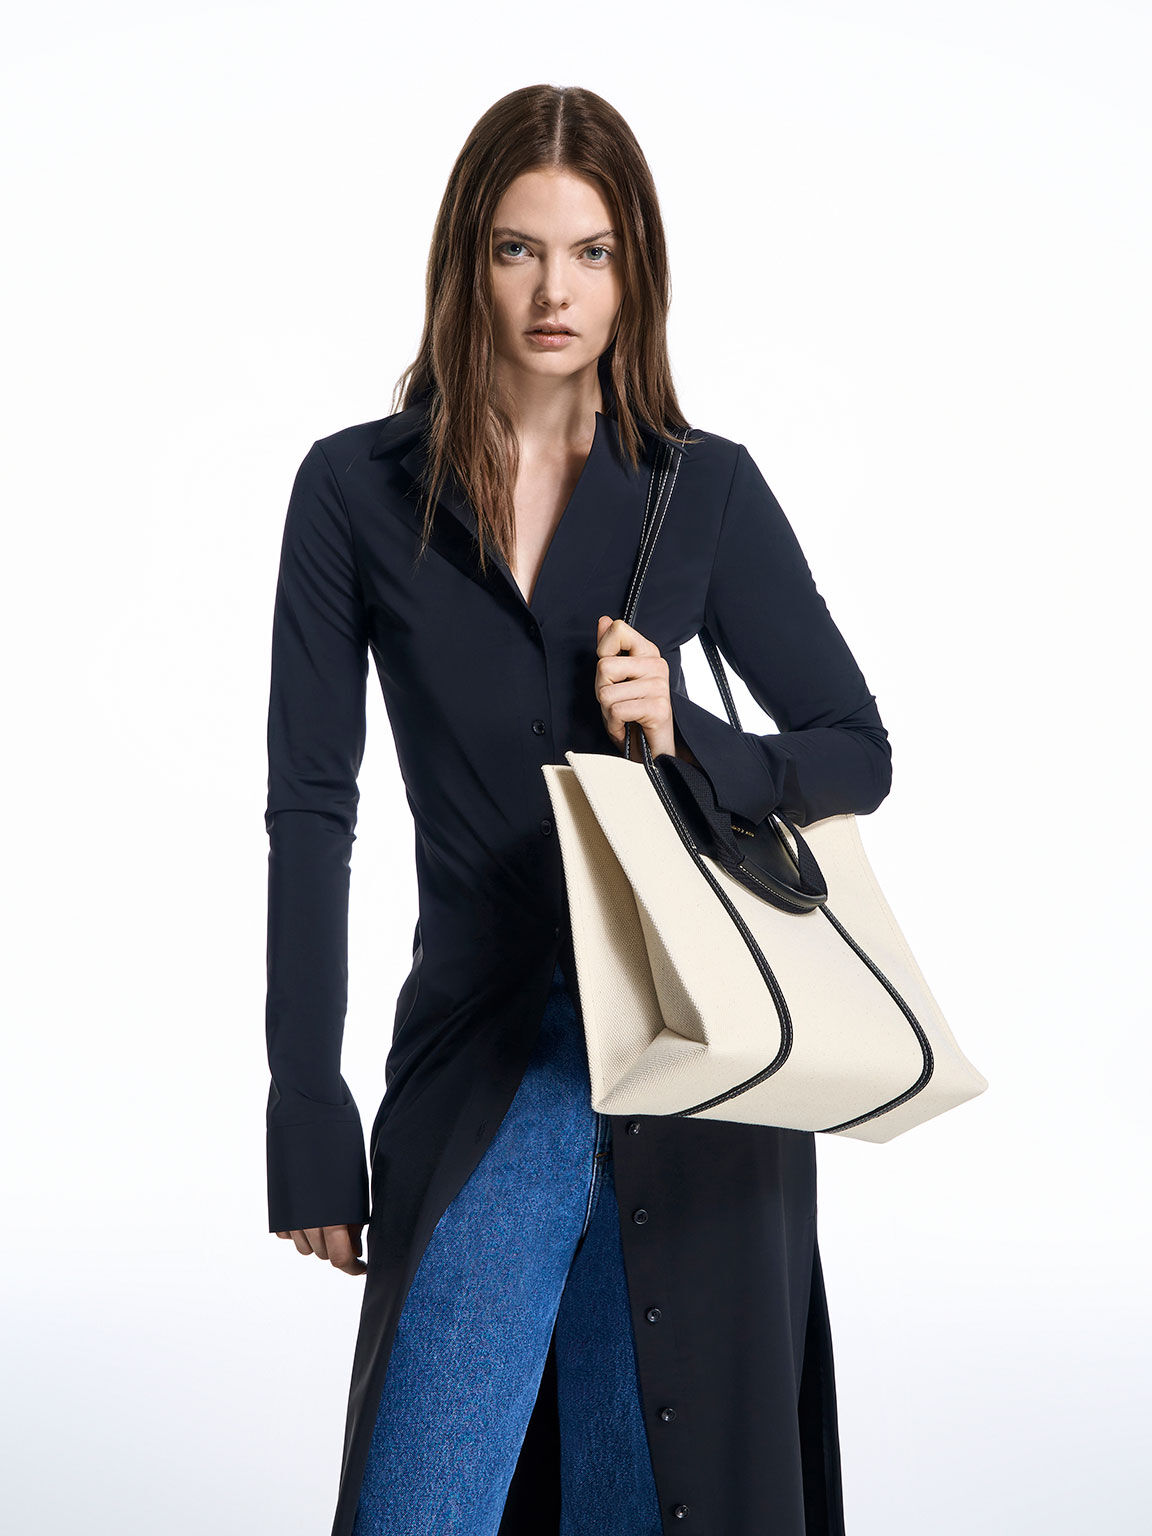 Saxelby Canvas Tote Bag